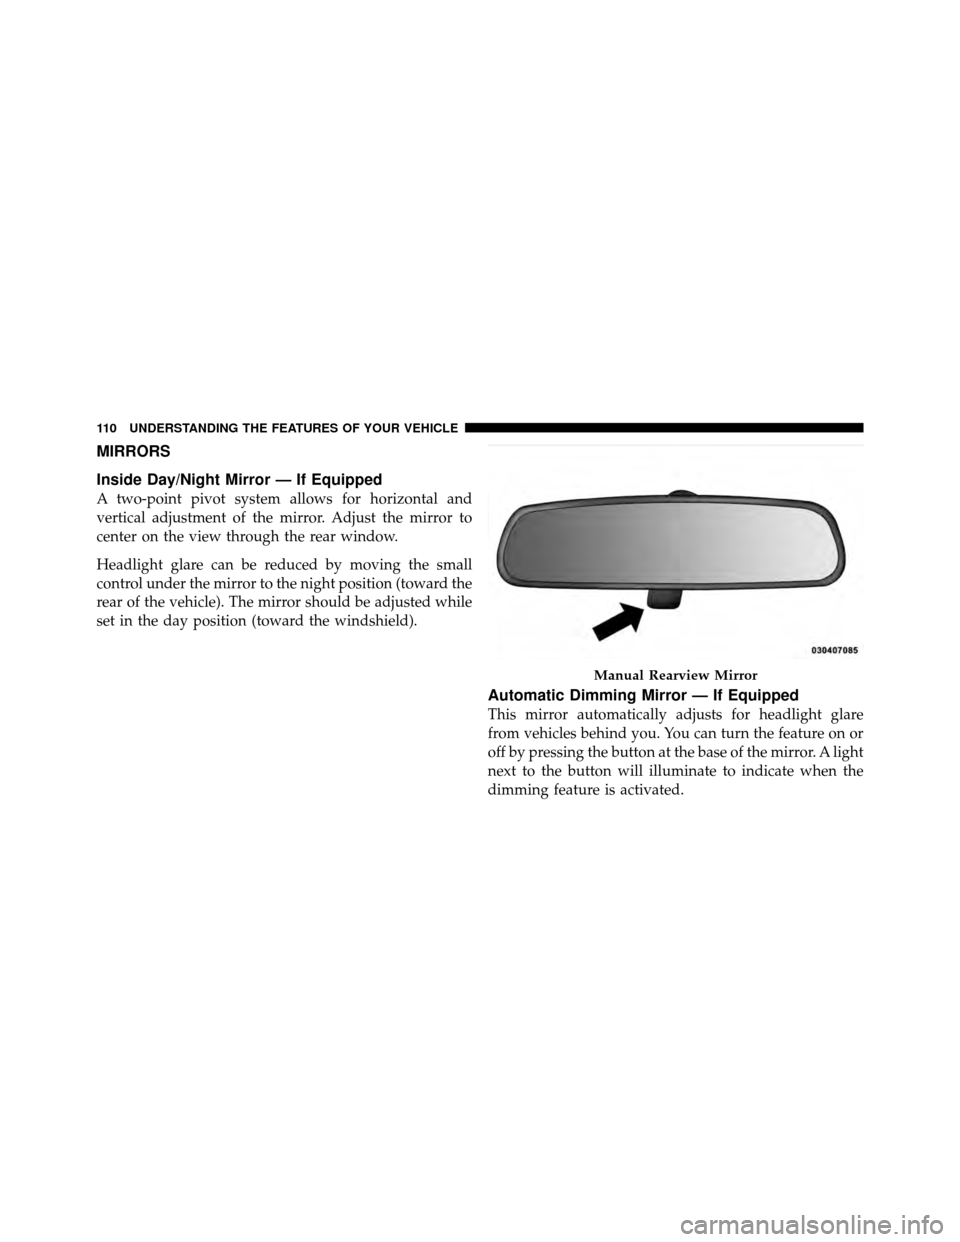 DODGE GRAND CARAVAN 2010 5.G Owners Manual 
MIRRORS
Inside Day/Night Mirror — If Equipped
A two-point pivot system allows for horizontal and
vertical adjustment of the mirror. Adjust the mirror to
center on the view through the rear window.
